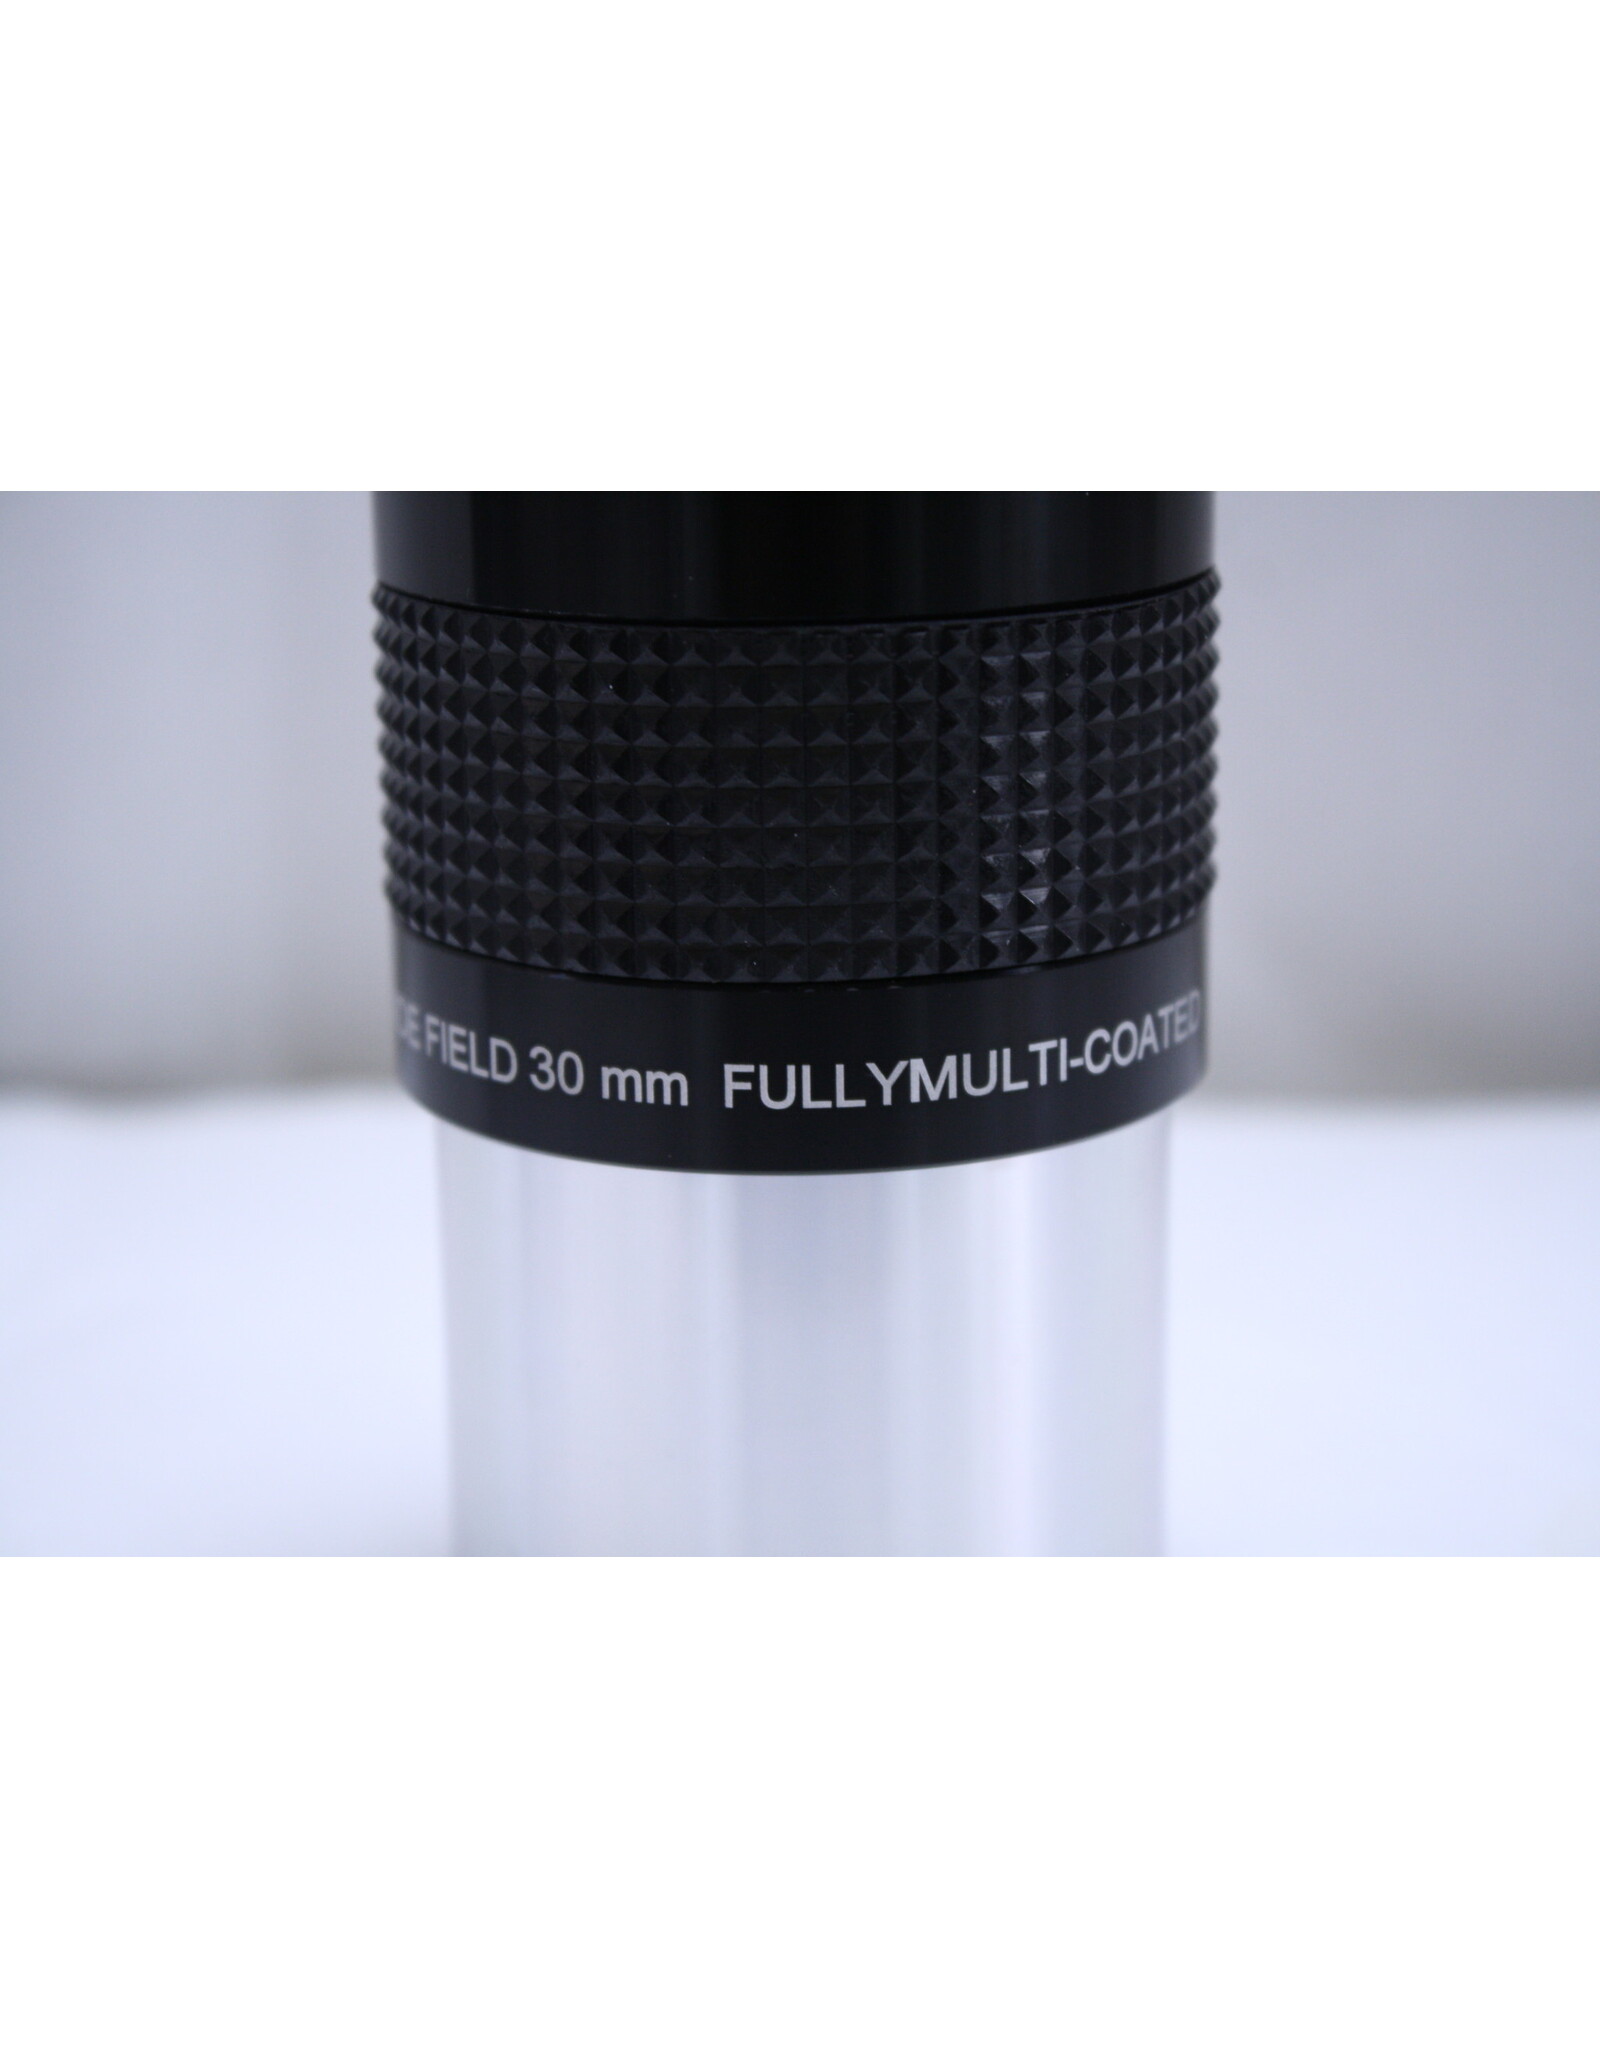 Zhumell Zhumell Superview 30mm 2 Inch Eyepiece